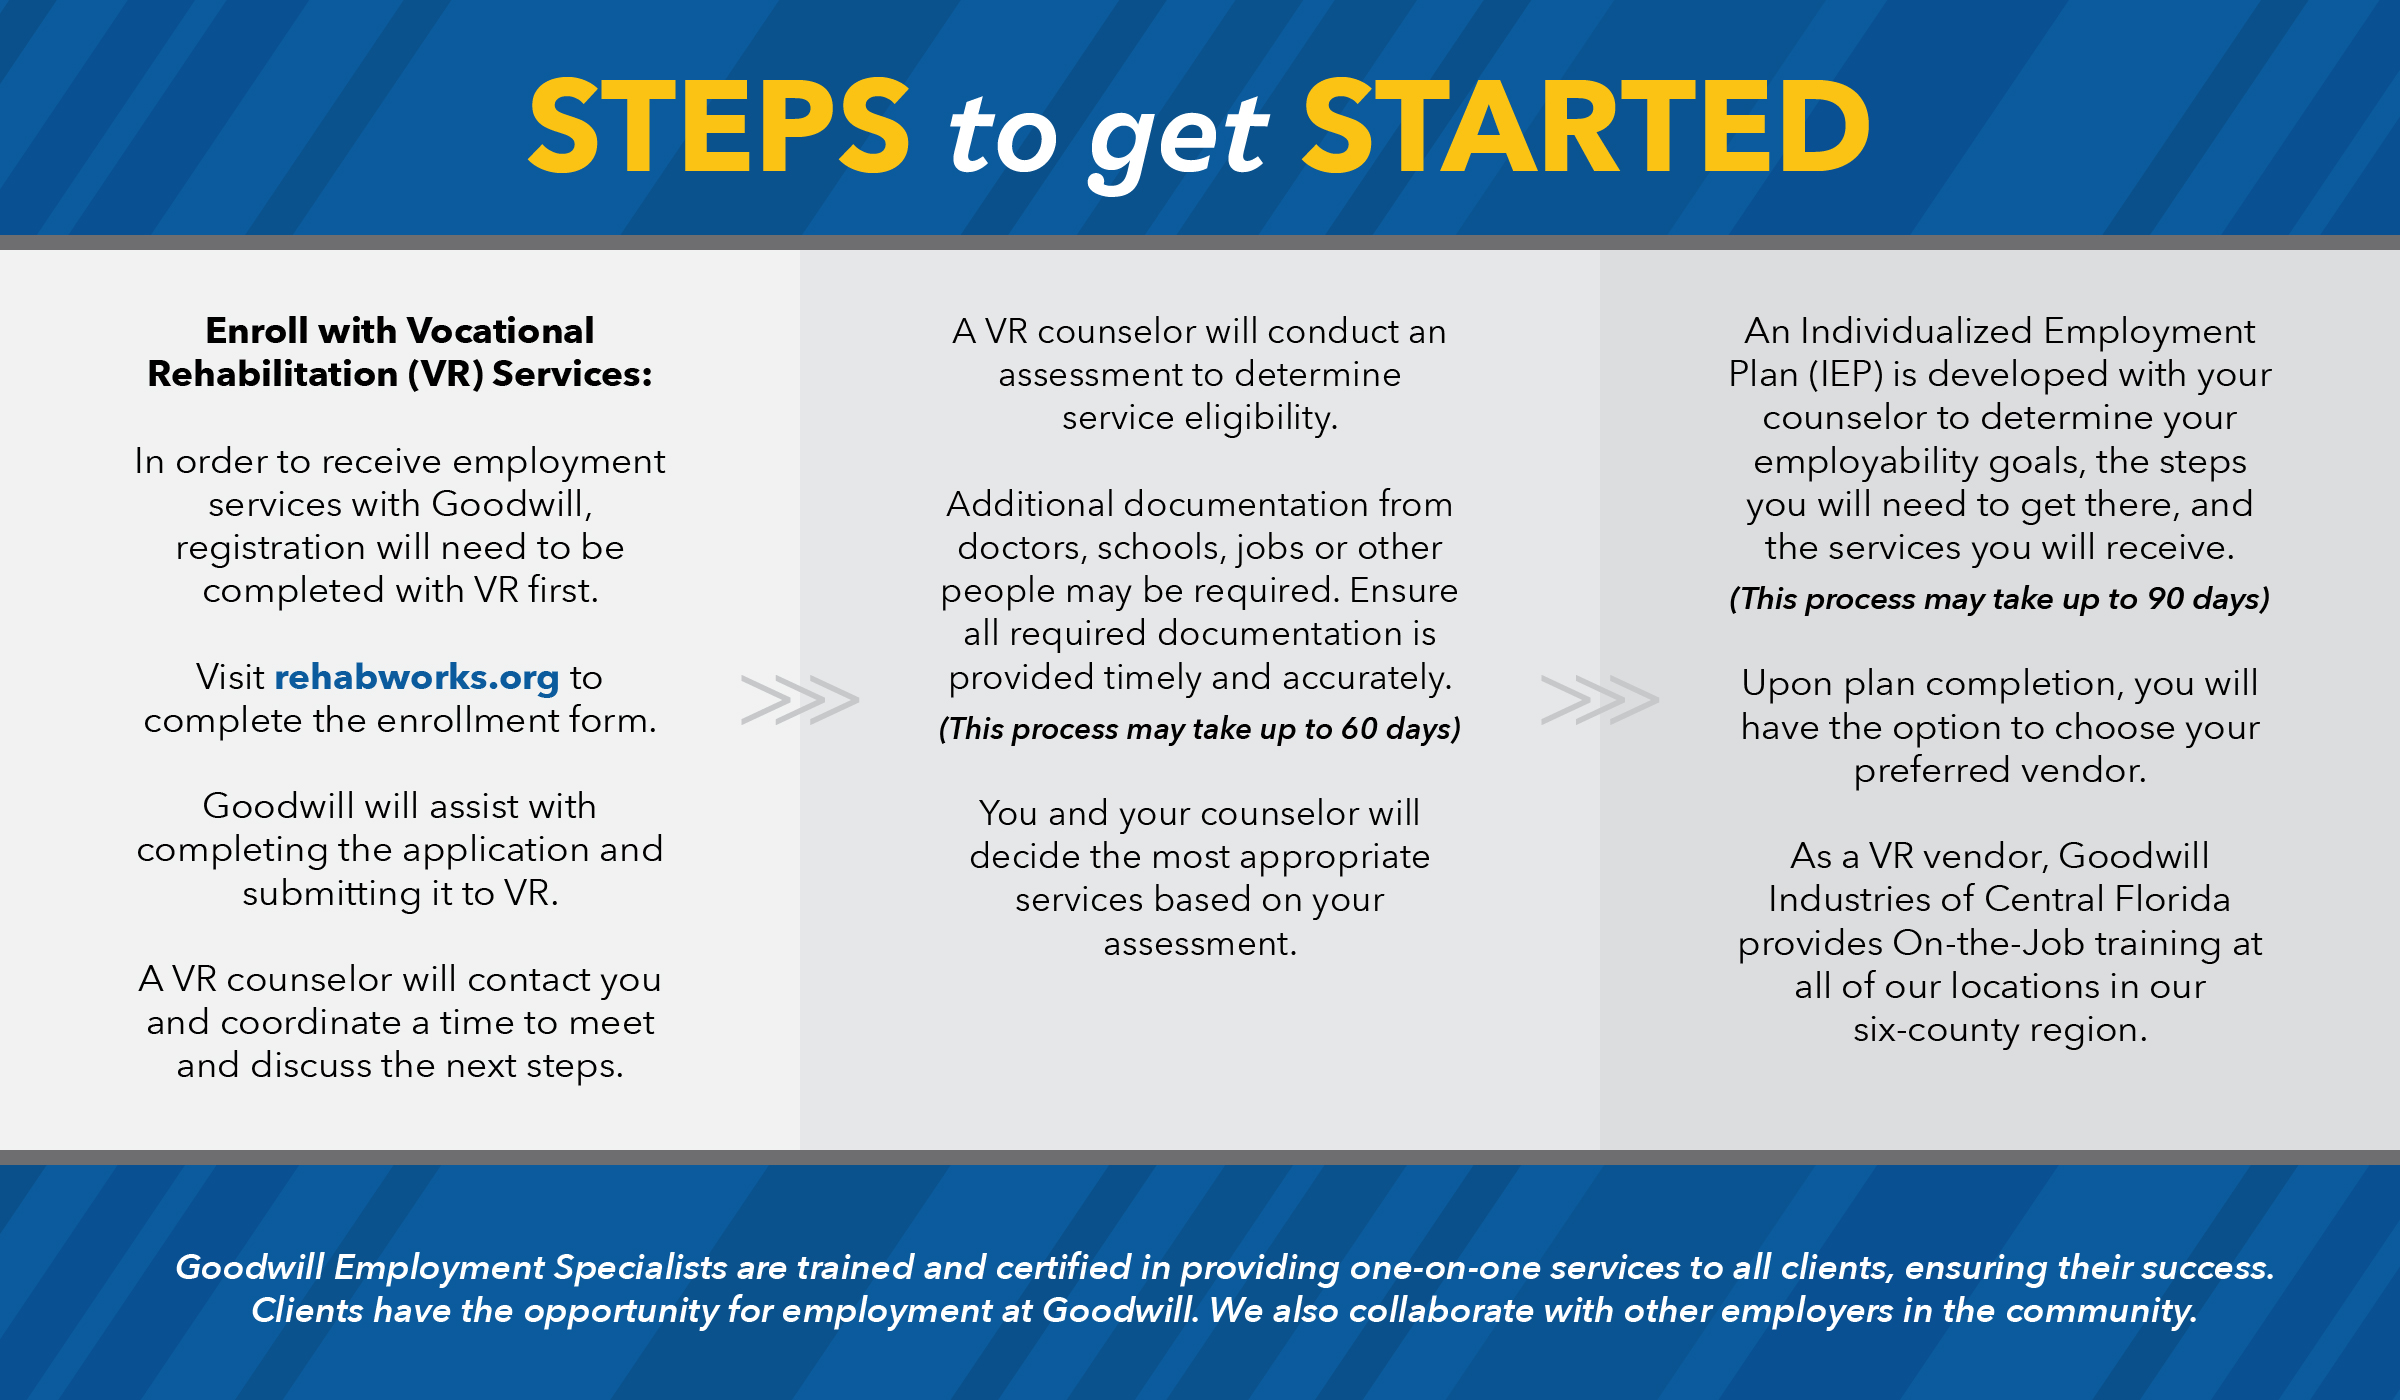 Steps to get started with Goodwill Vocational Rehabilitation services.